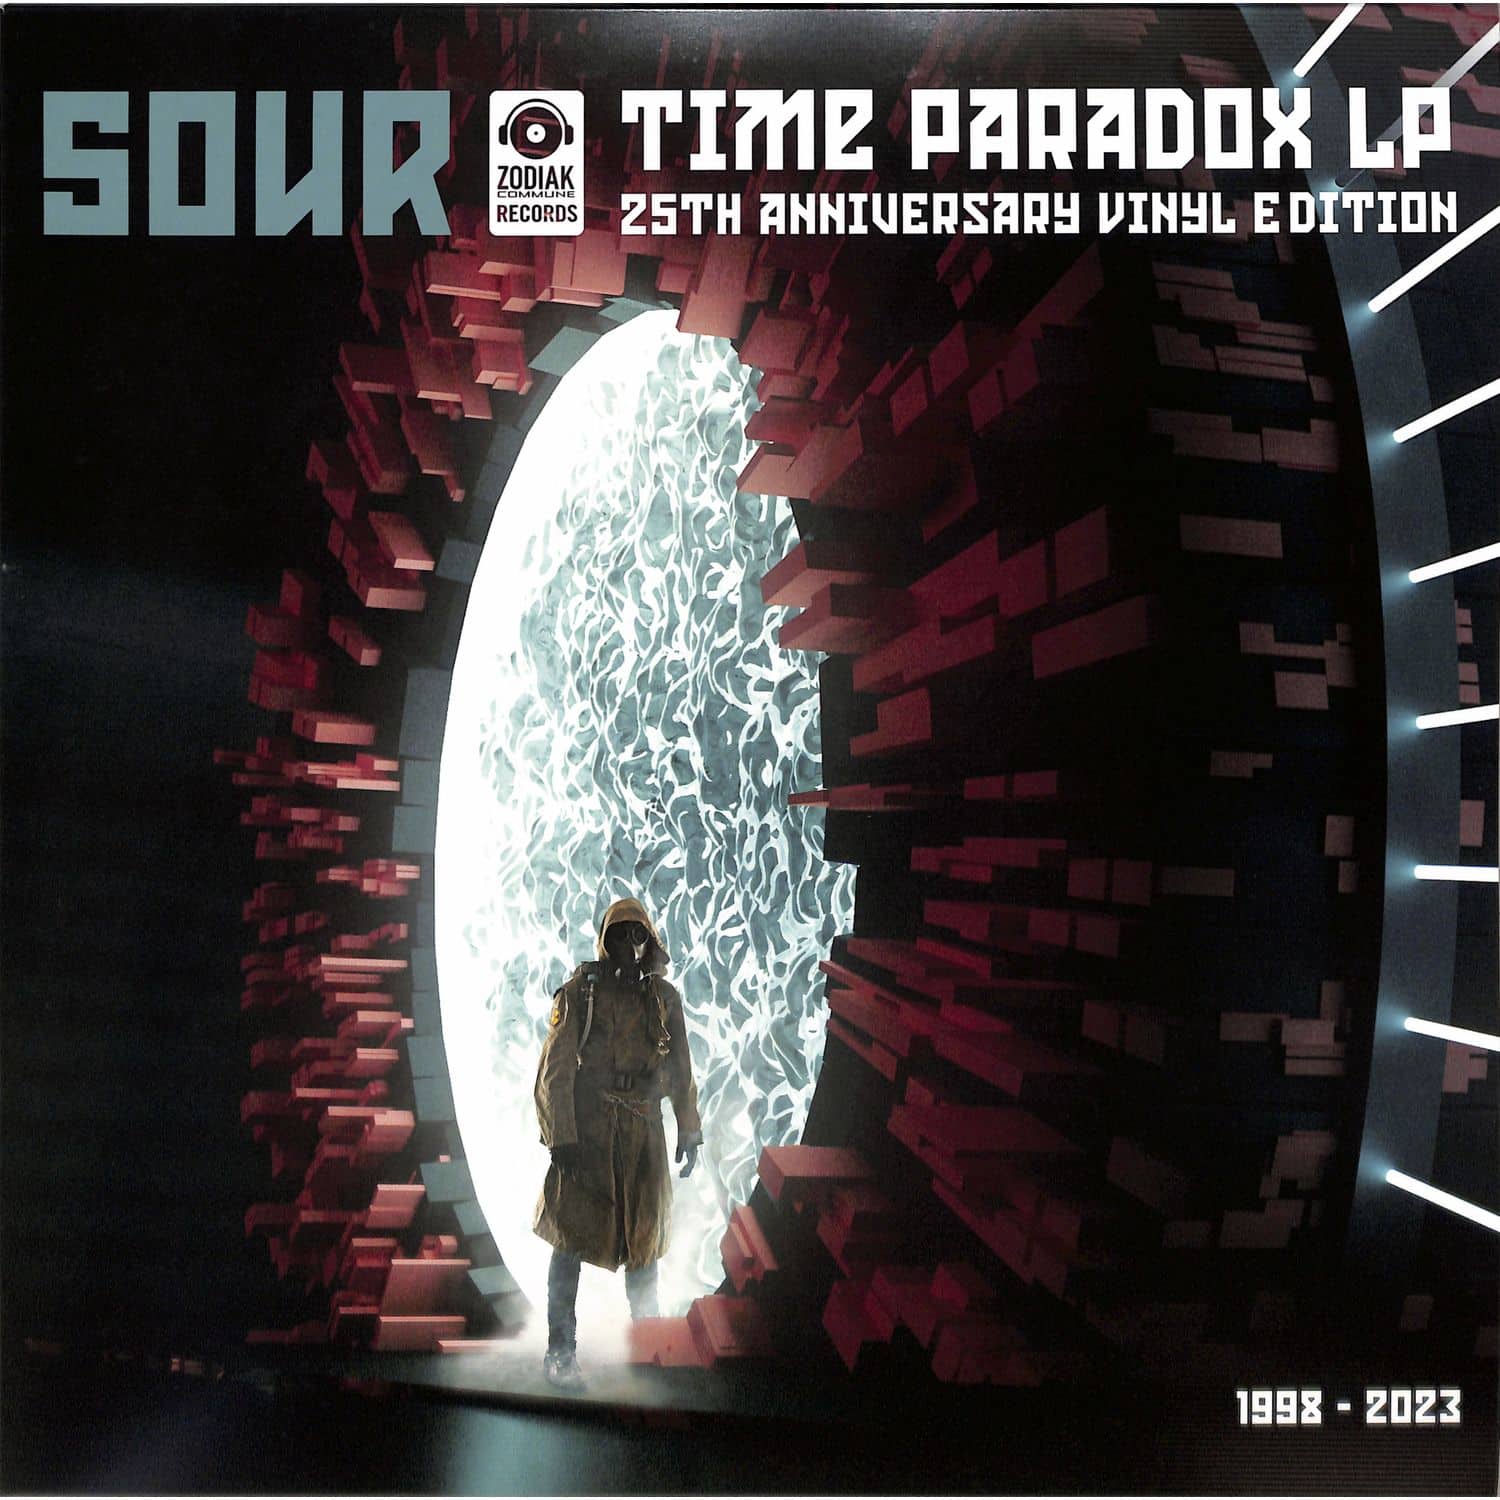 Sour - TIME PARADOX LP - 25TH ANNIVERSARY EDITION 